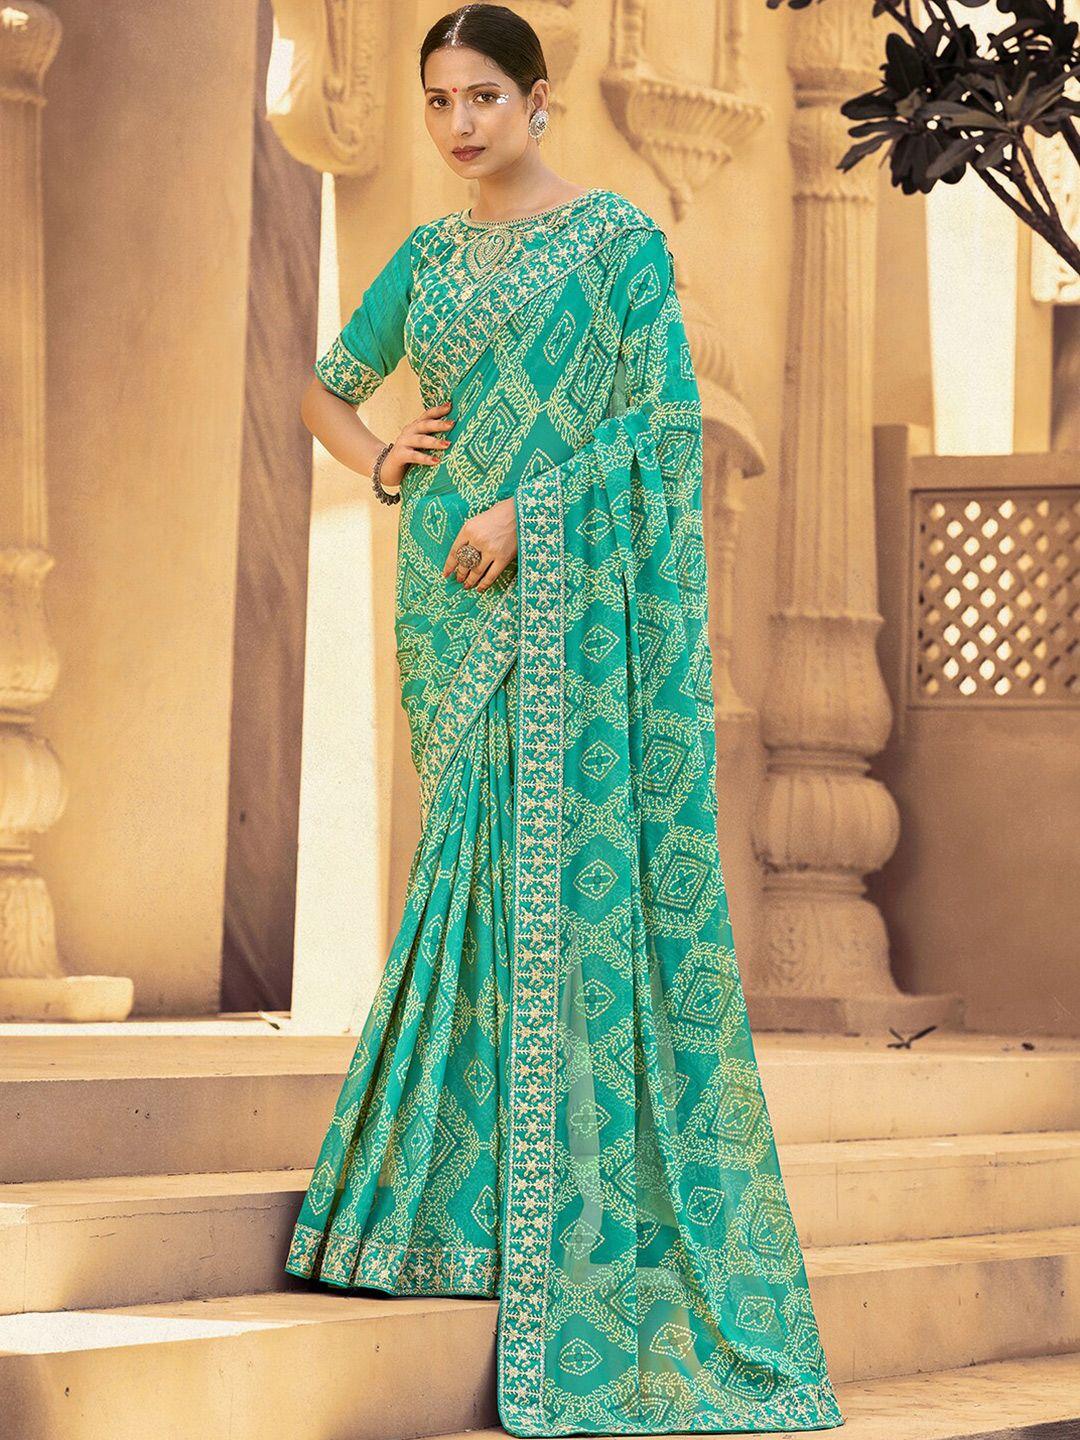 mitera turquoise blue & white embroidered pure georgette bandhani saree